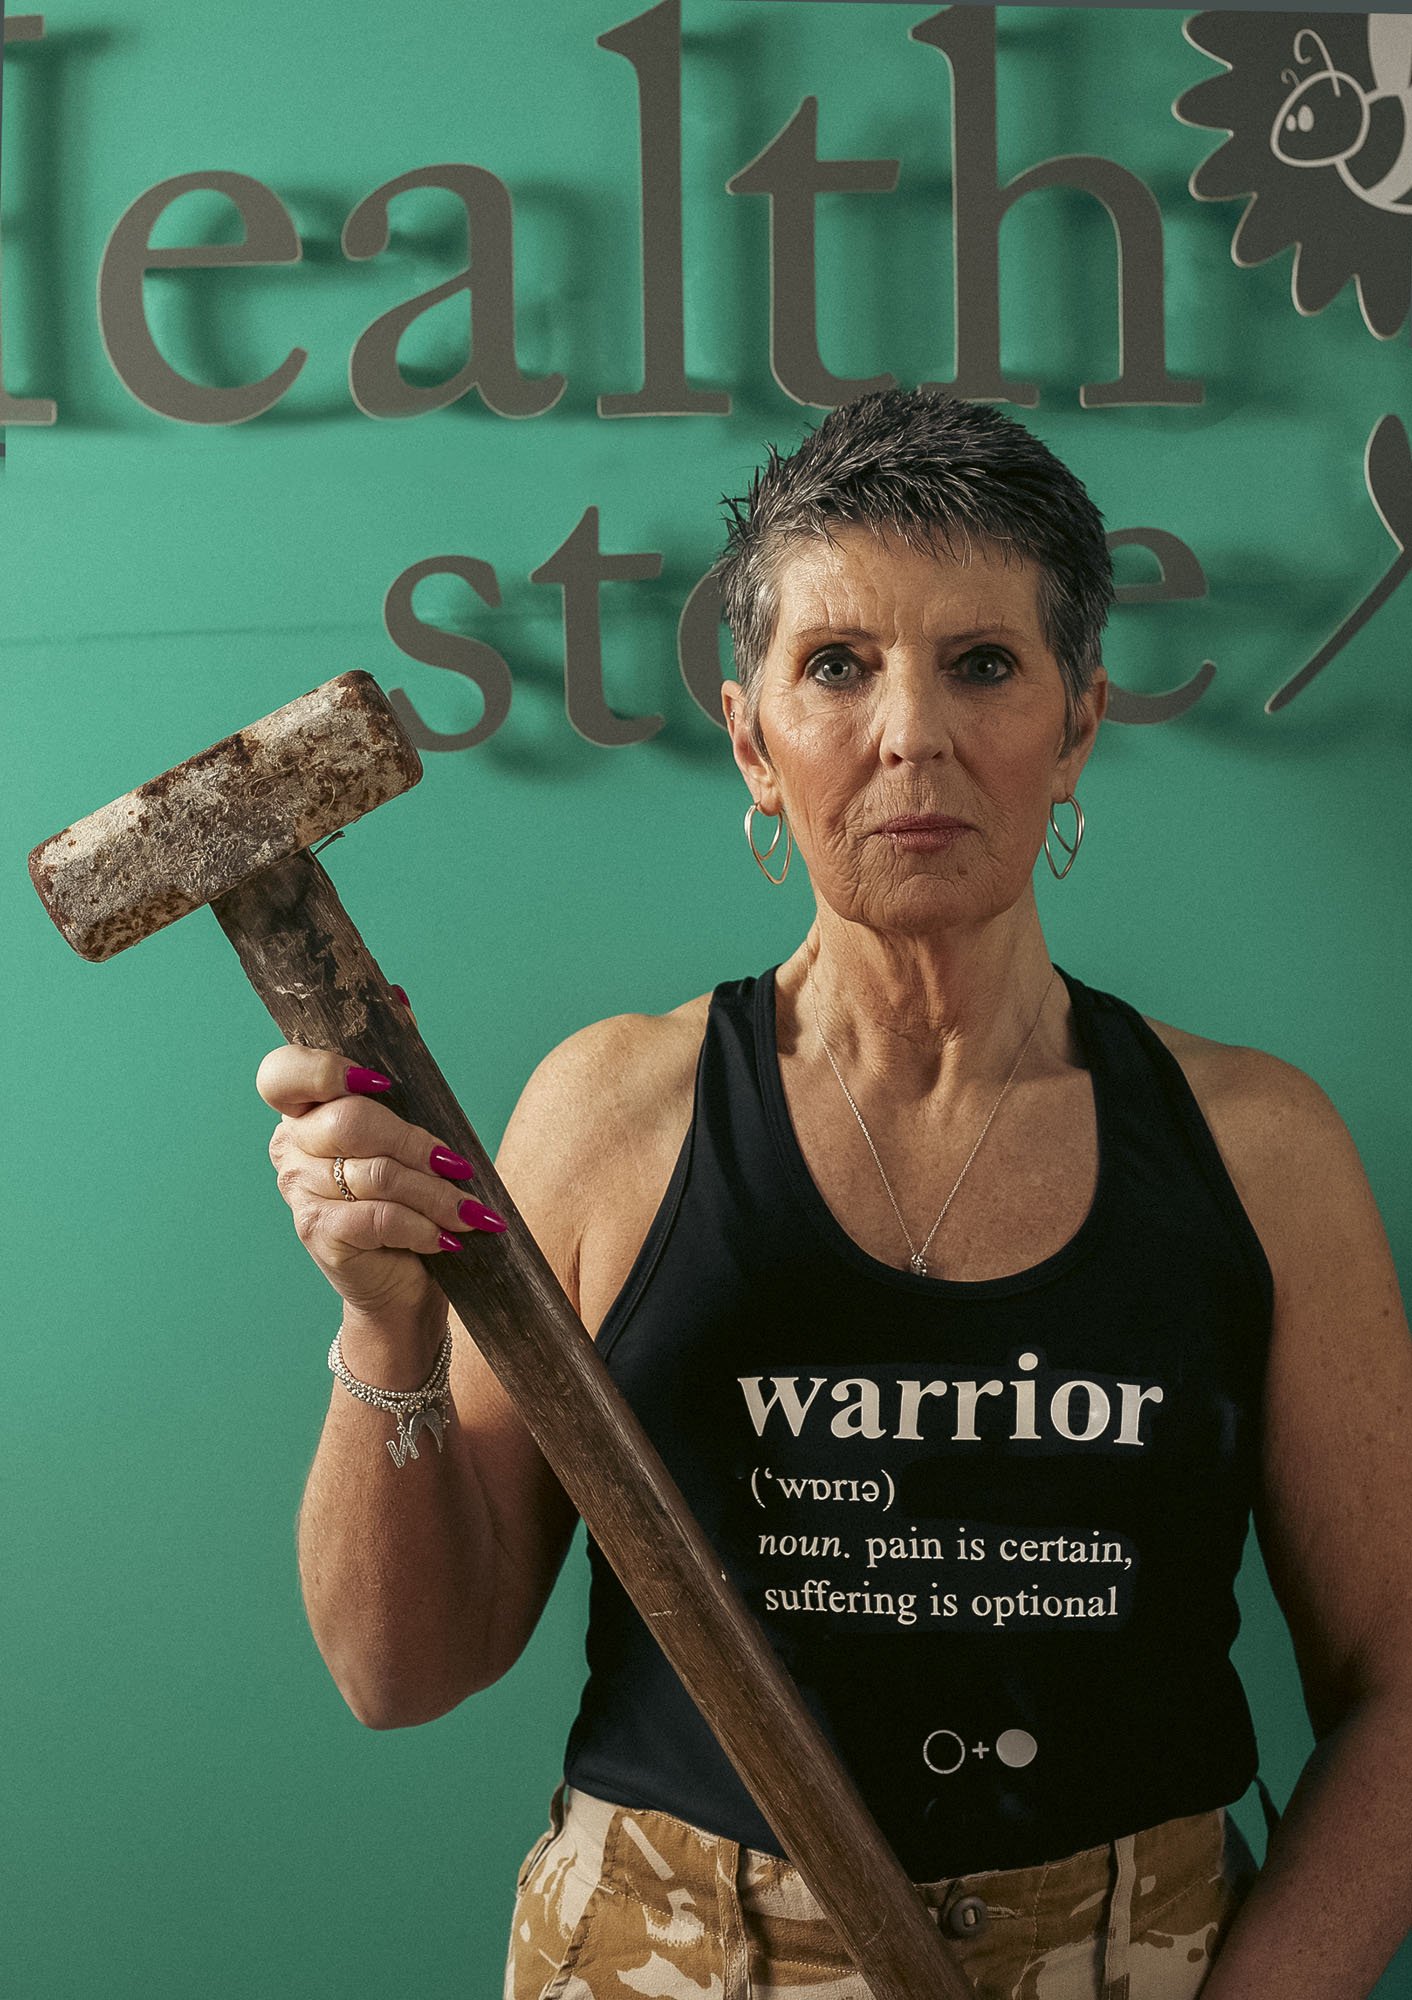 Portrait of a woman, holding a sledgehammer and wearing a vest with logo ‘Warrior, noun, pain is certain, suffering is optional’. 